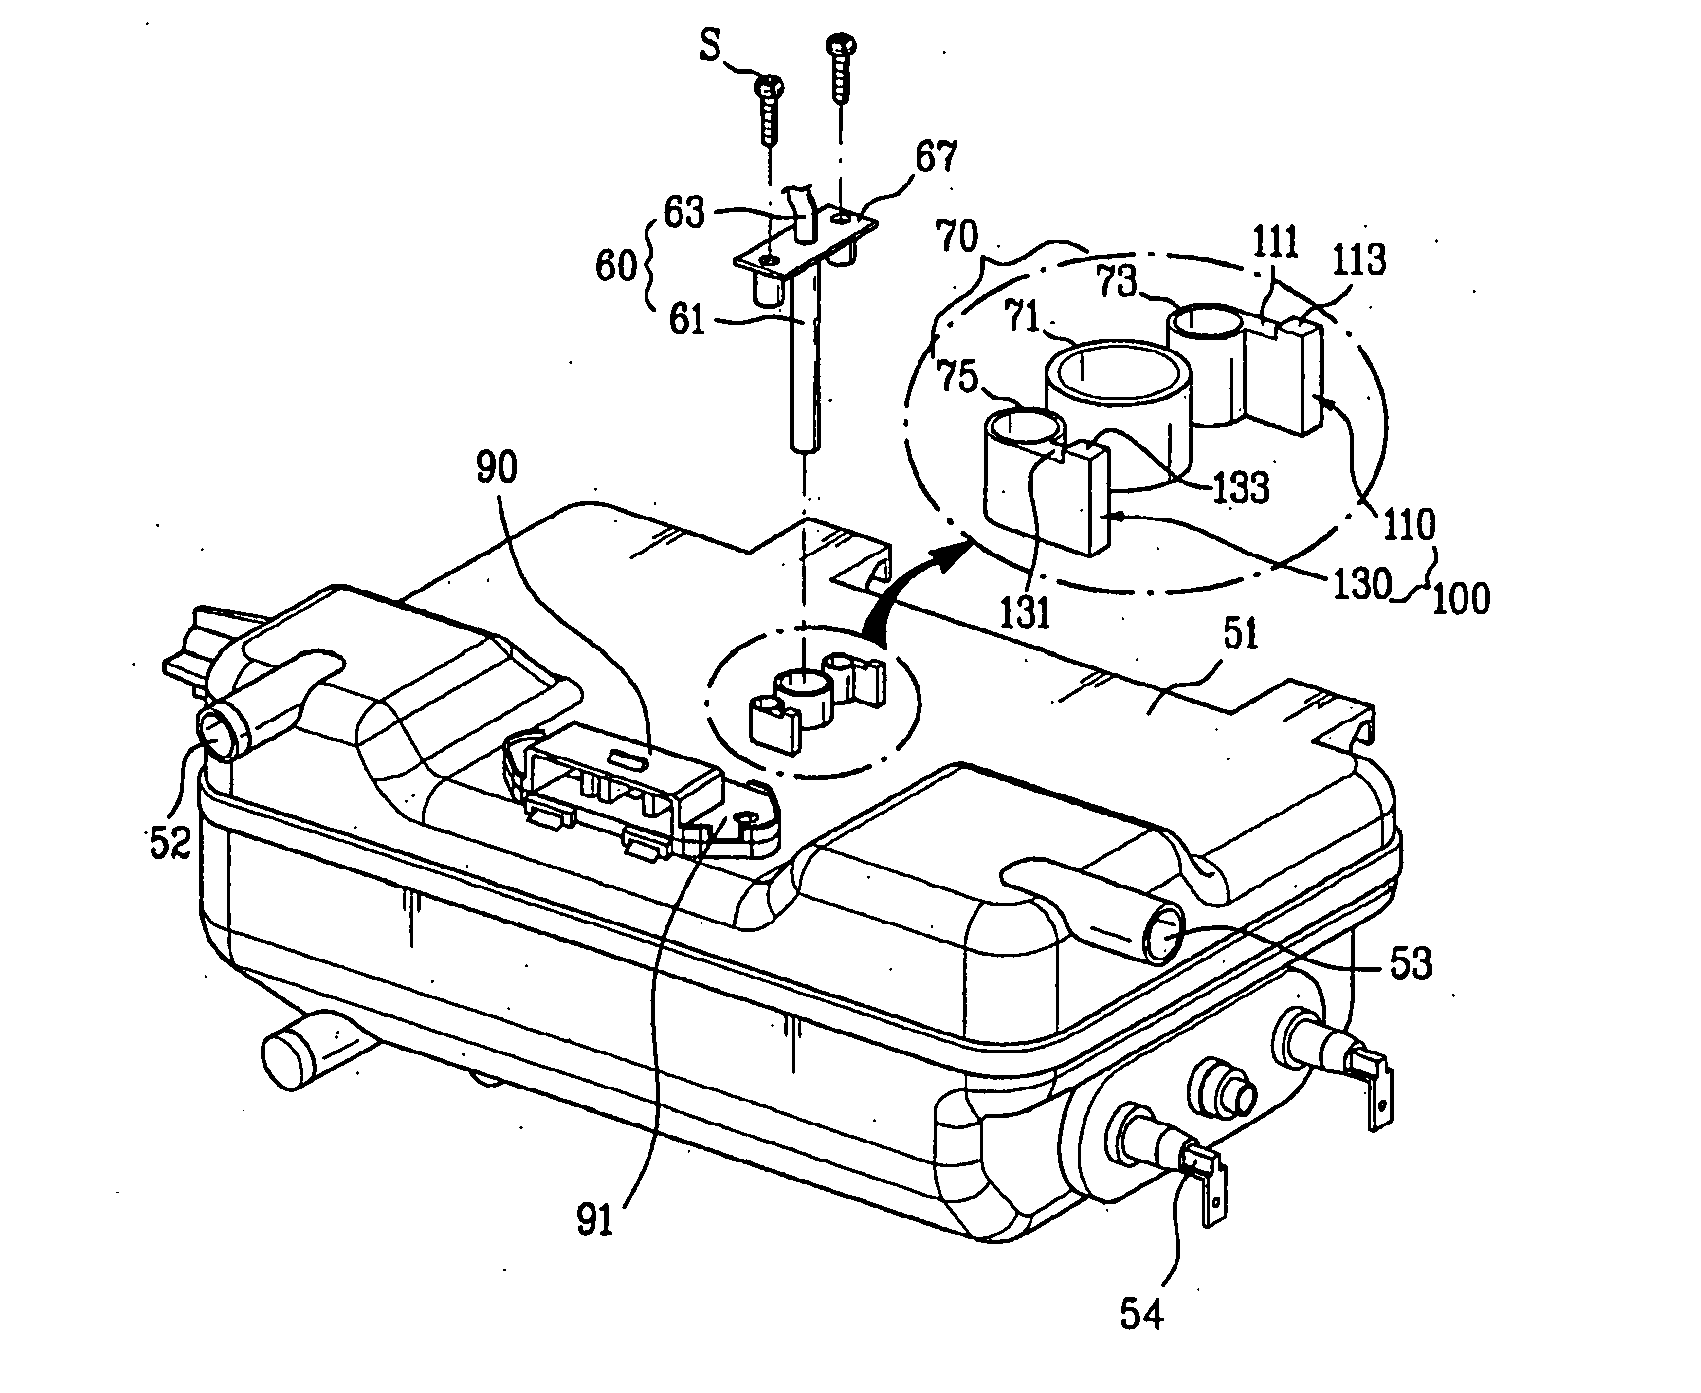 Structure for Mounting Temperature Sensor of Steam Generation Apparatus in Drum Type Washer